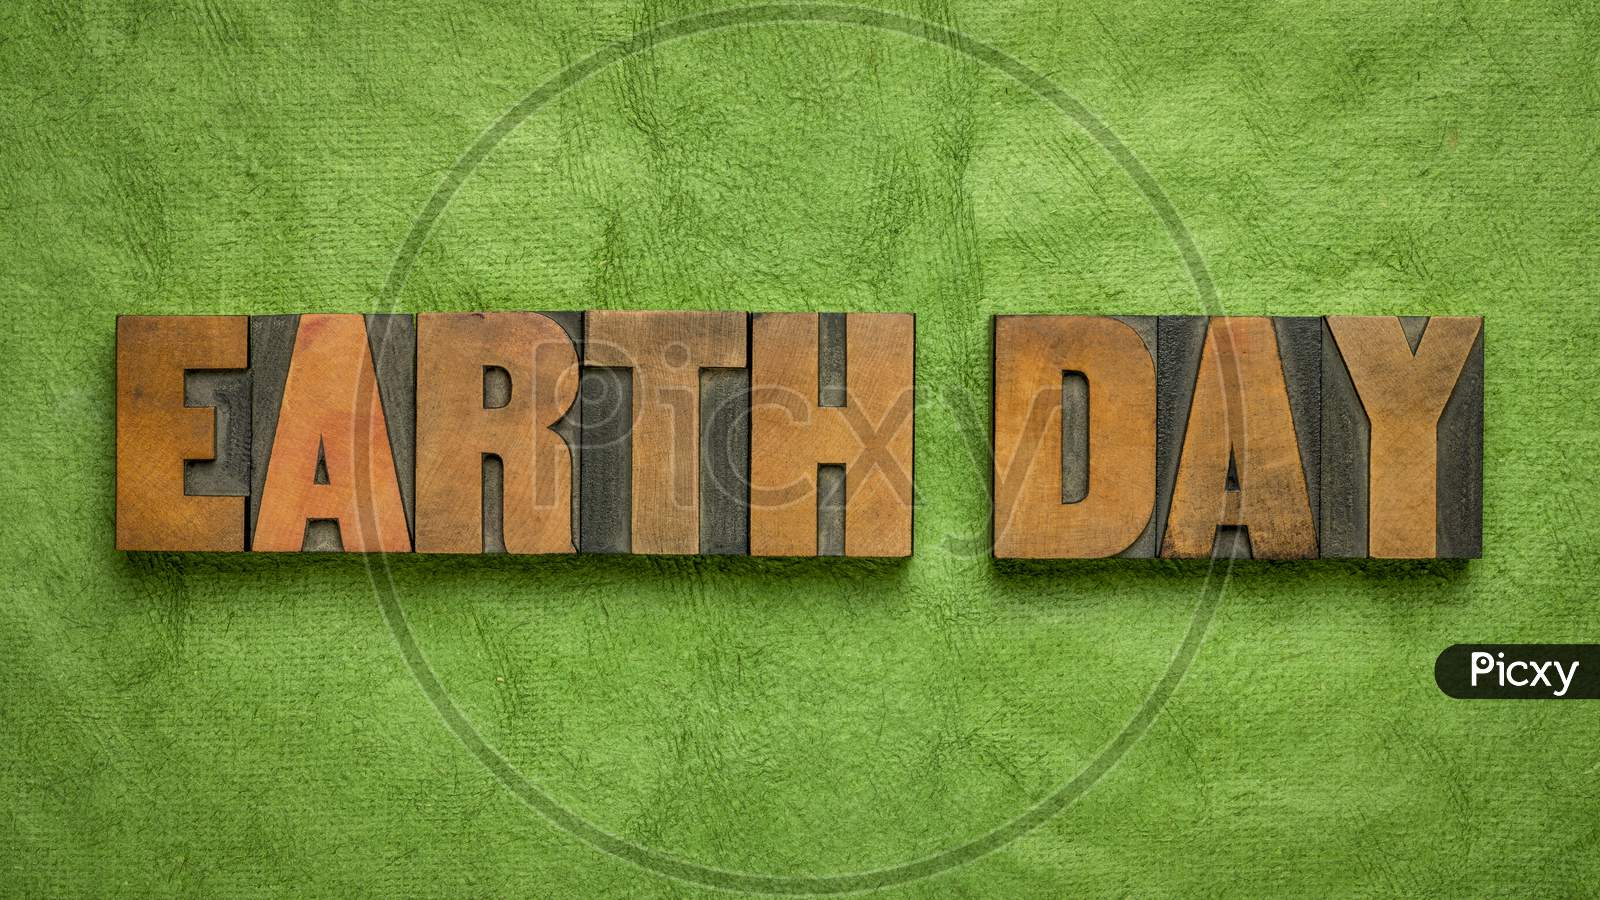 Earth Day - Annual Event Celebrated On April 22 To Demonstrate Support For Environmental Protection, Word Abstract In Letterpress Wood Type Against Green Handmade Paper